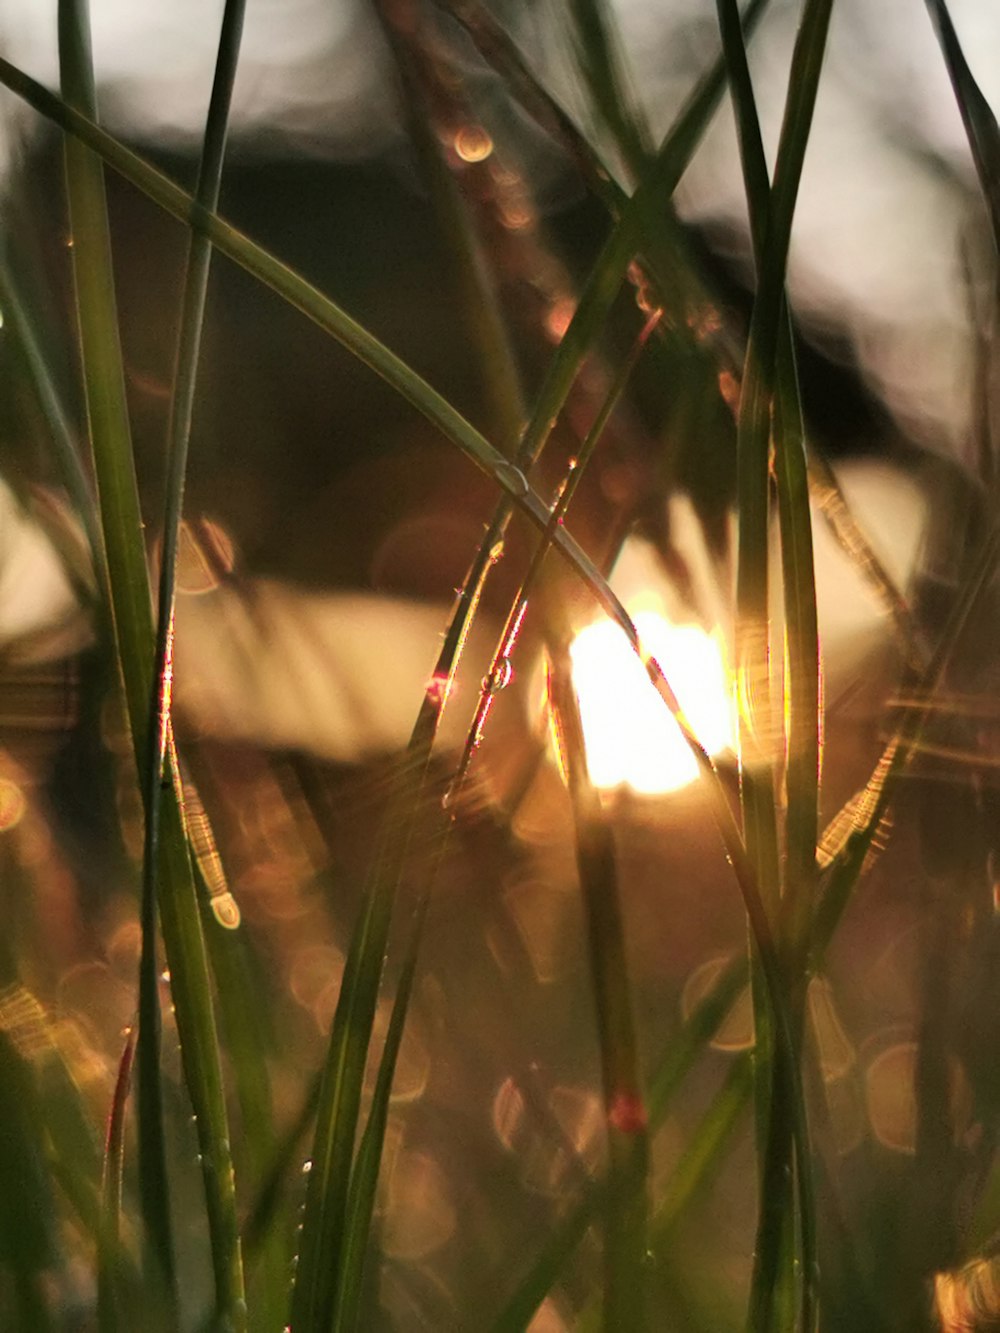 green grass with sun rays